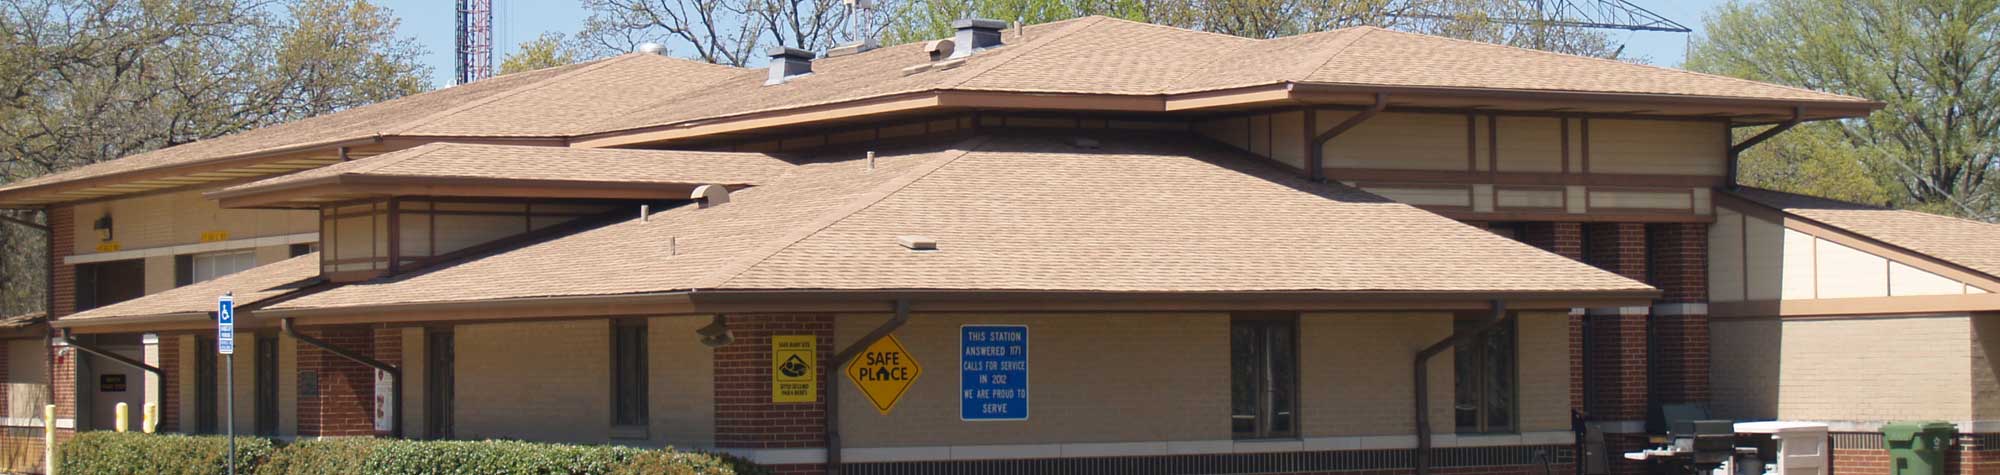 High Quality Roofing Services